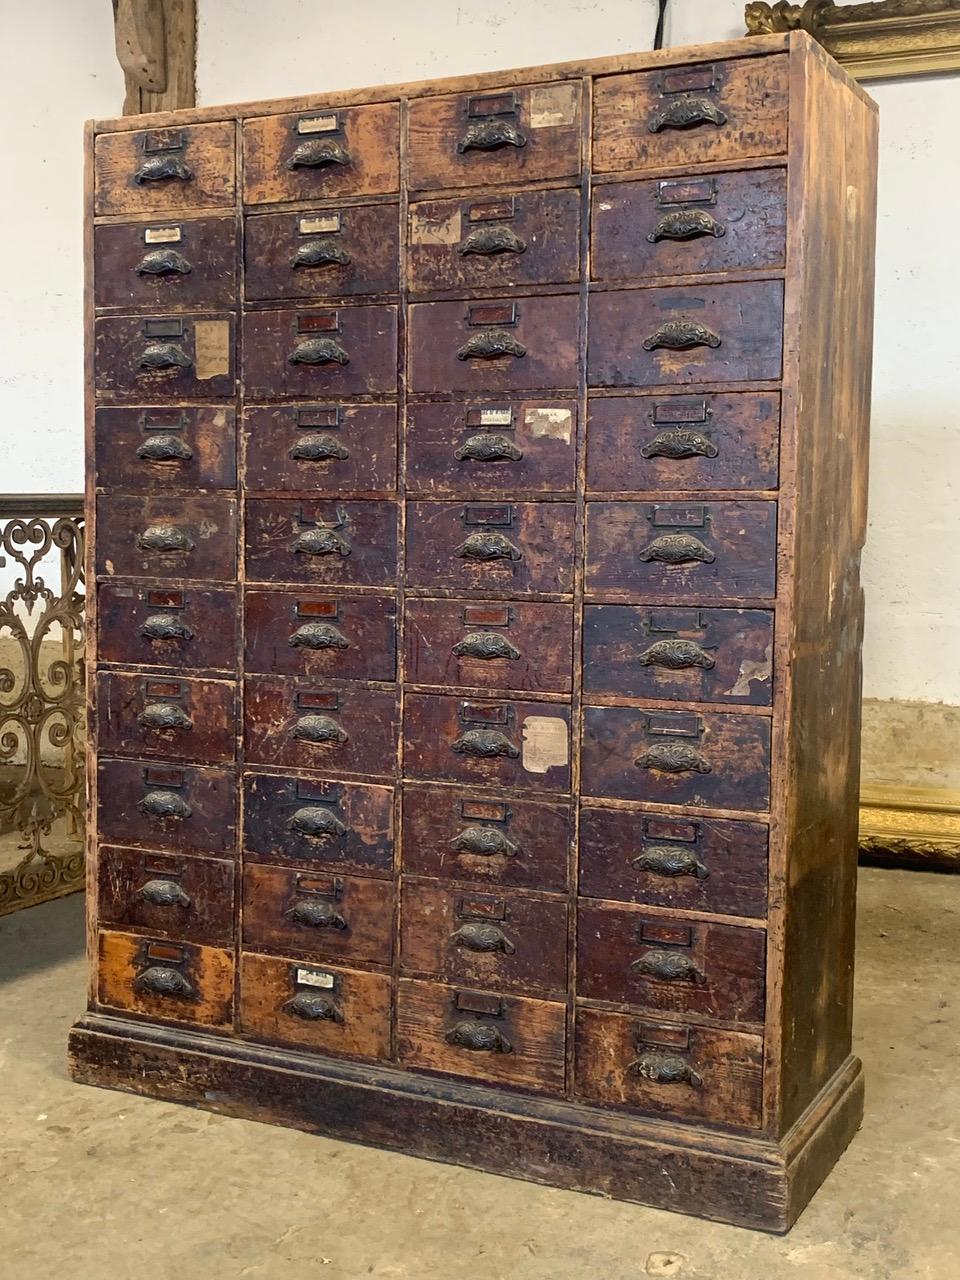 A lovely 19th century bank of wooden drawers with original handles. The wood has a nice patina and wear from many years of use. I nice original solid condition ready for use.
 